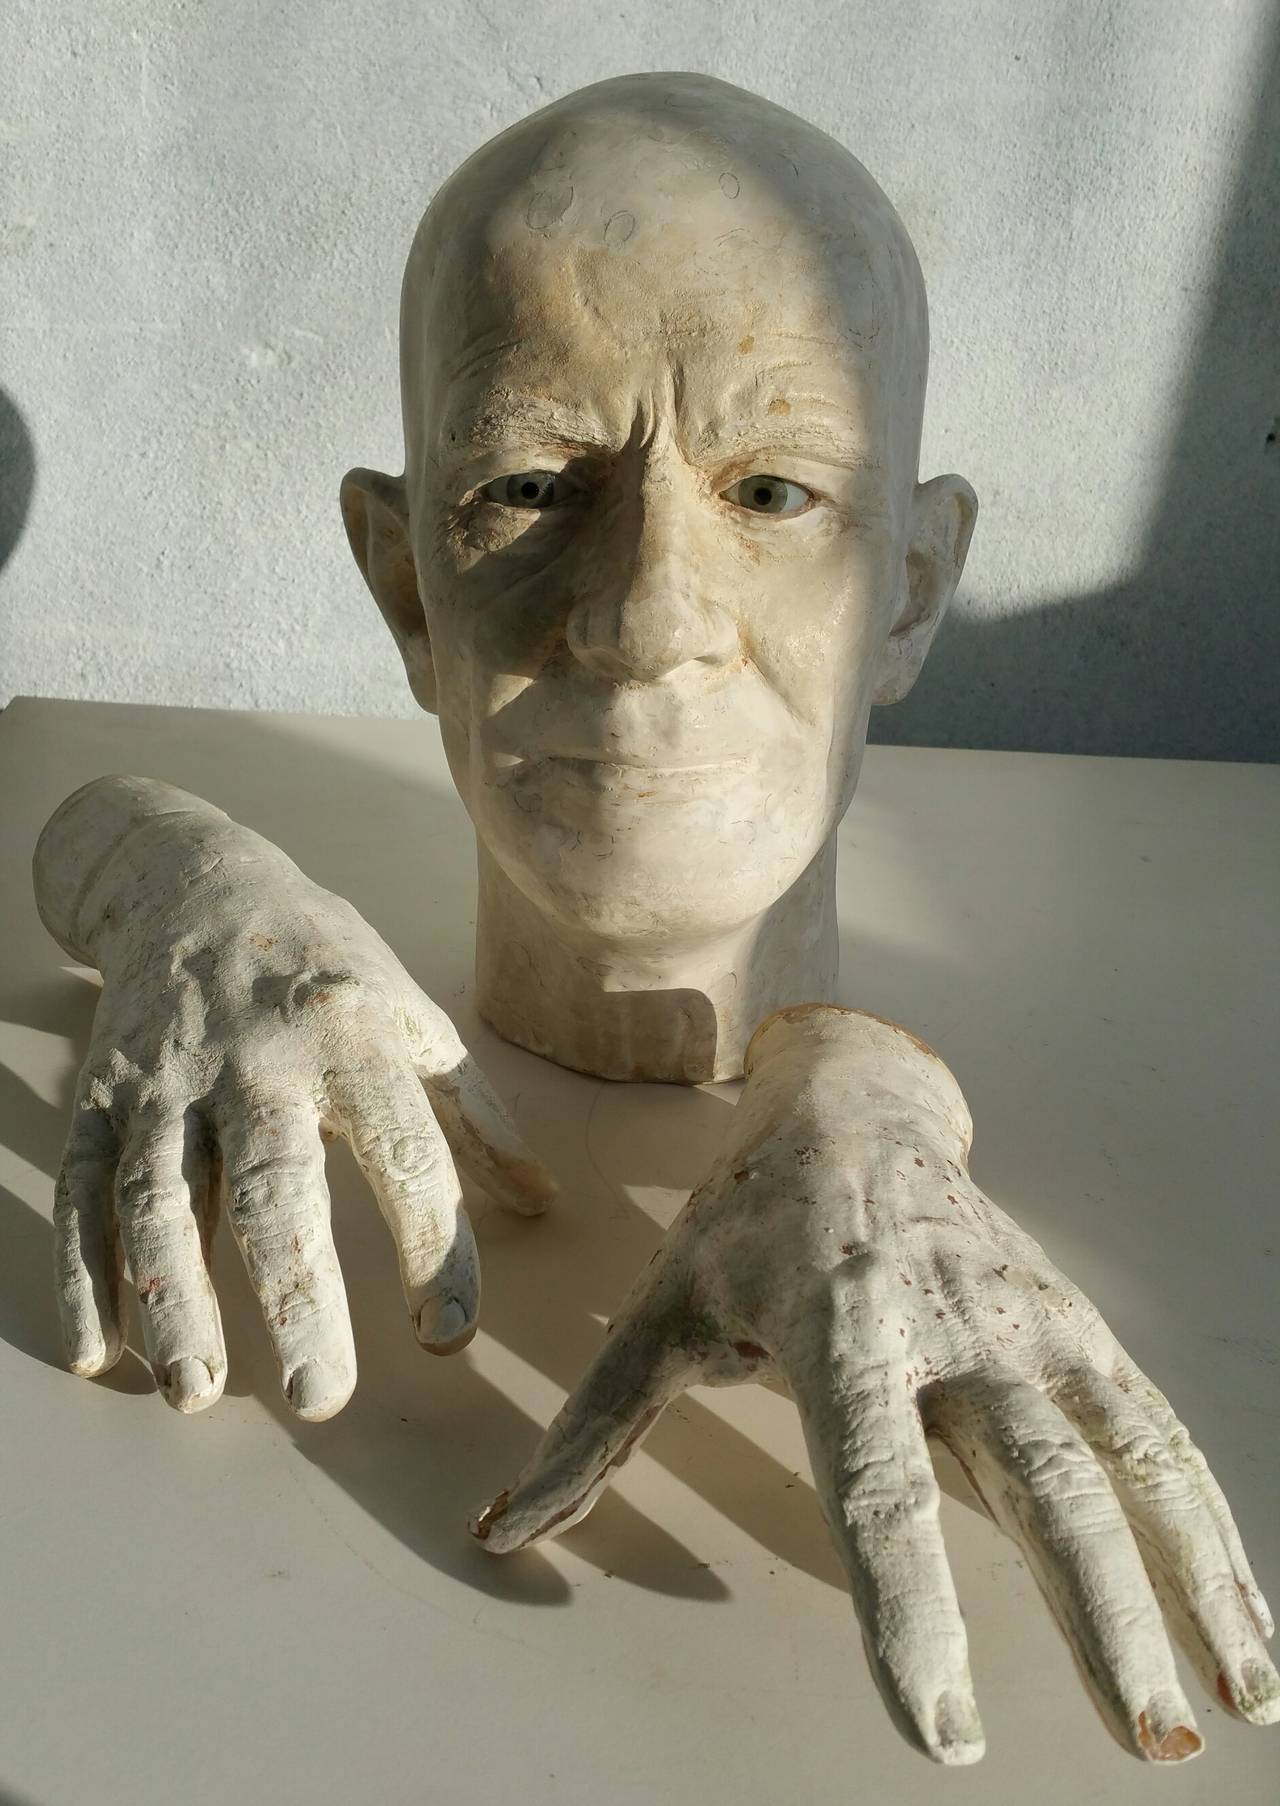 1960s Surrealist sculpture.. Life size Head and Hands,, Very well exicuted,, Molded Fiberglass,,wood,,